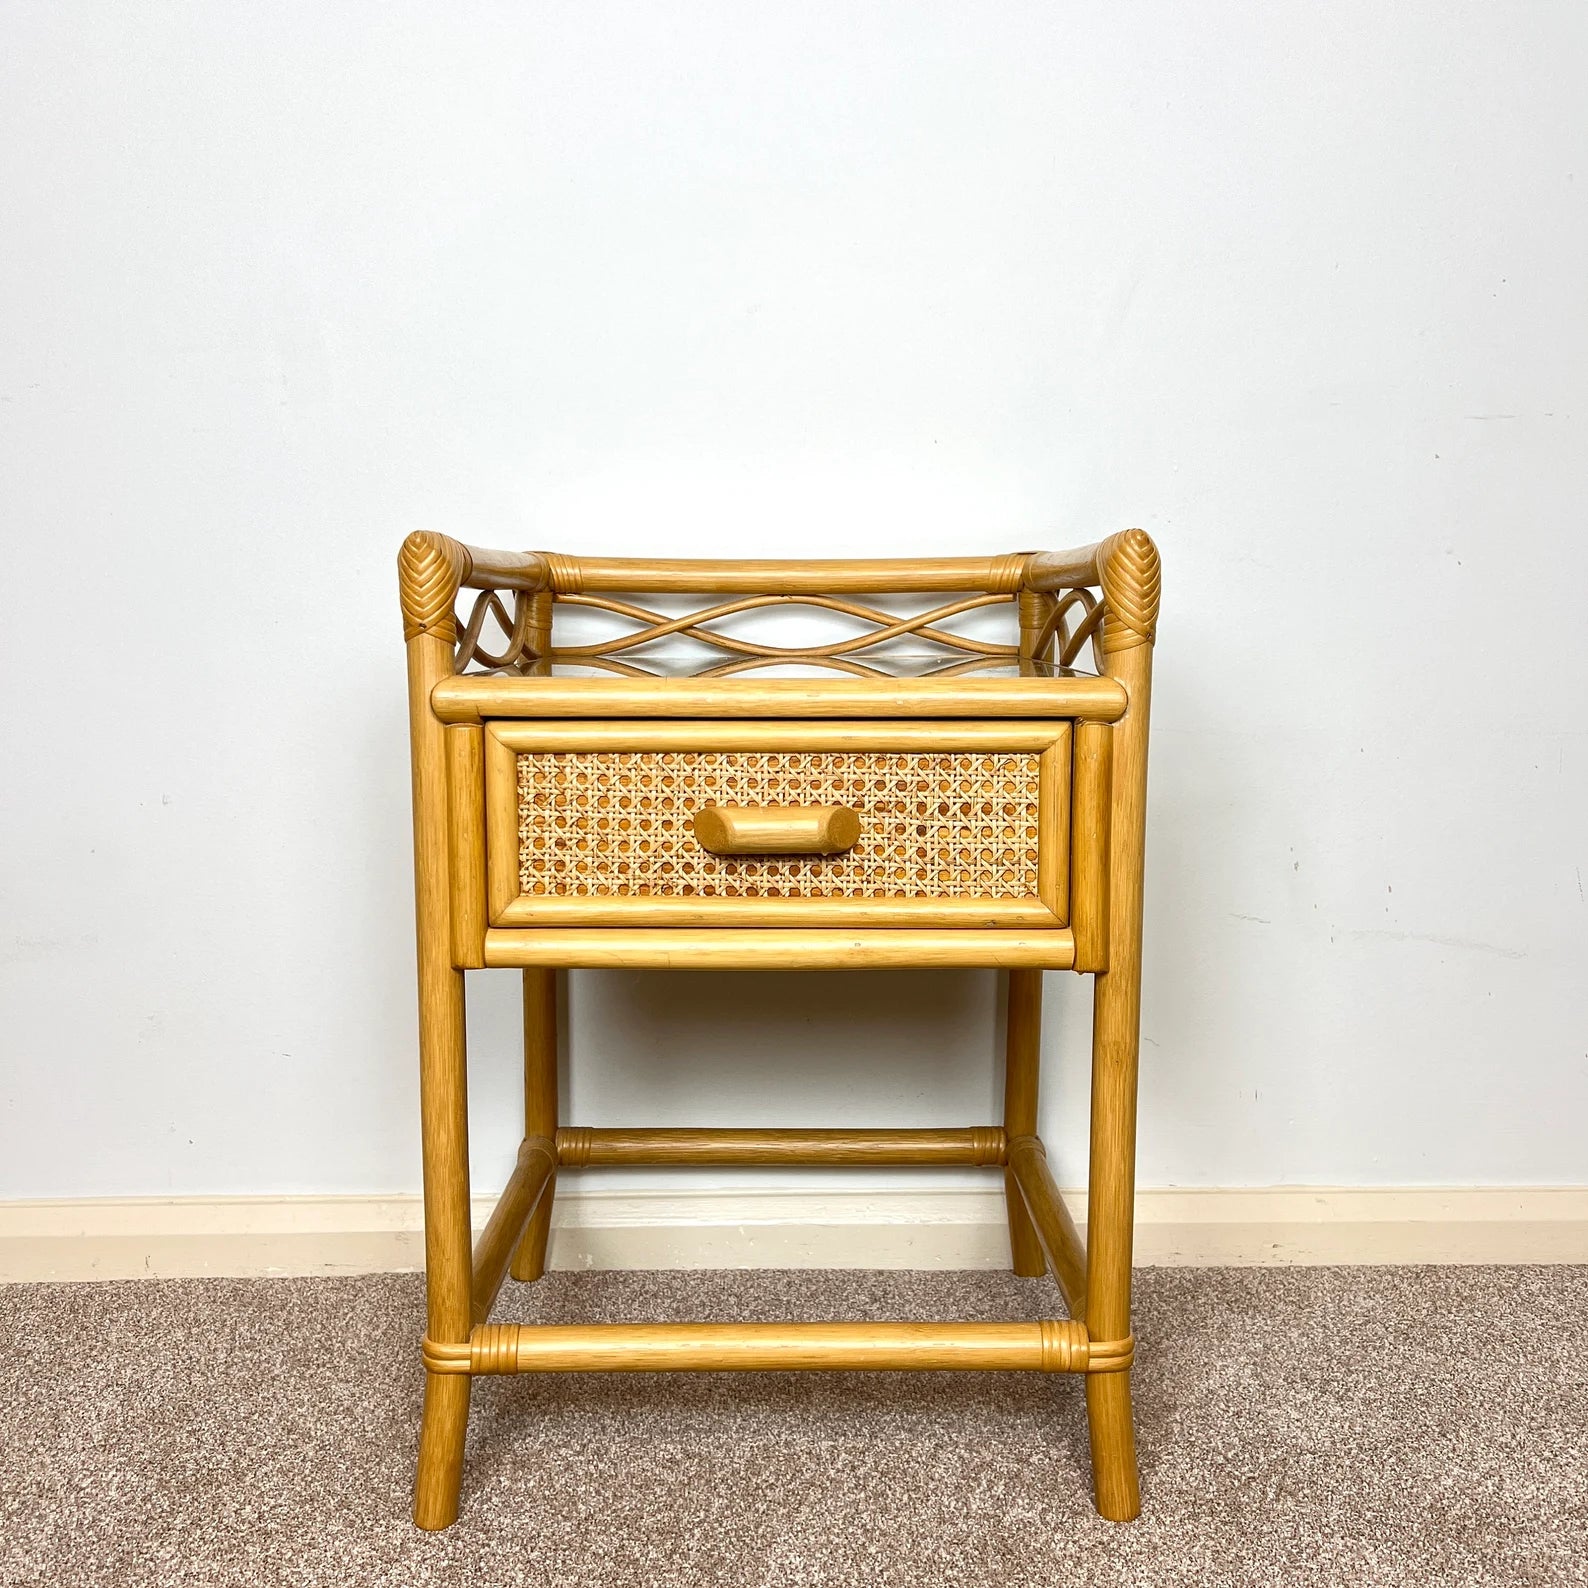 Rattan Bamboo Cane Bedside Table with drawer, Boho Retro Tiki